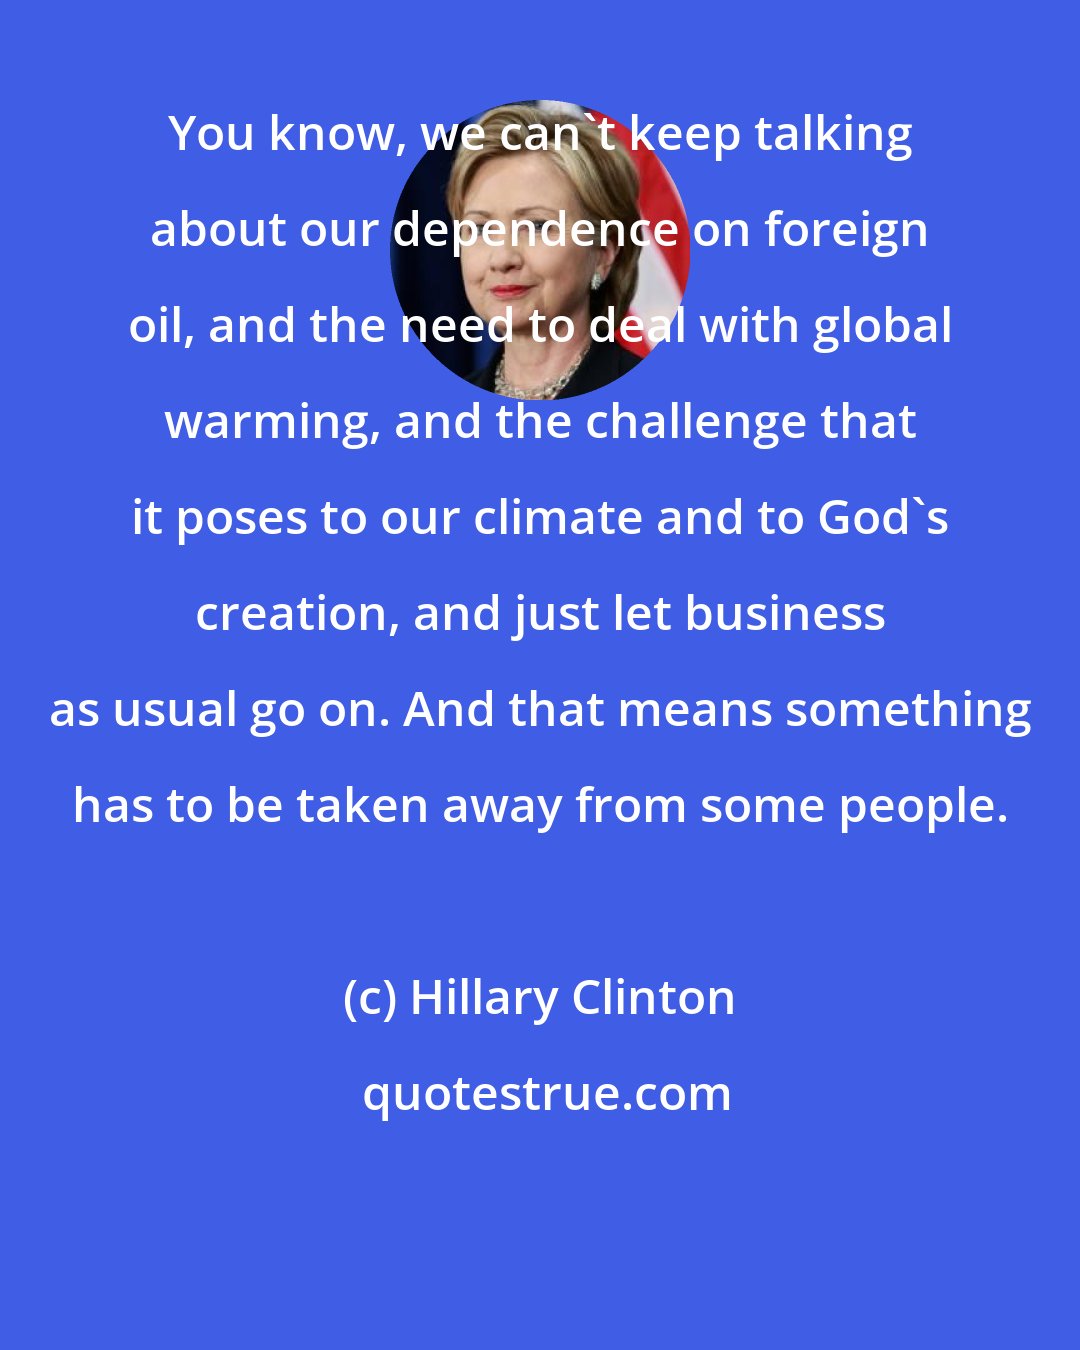 Hillary Clinton: You know, we can't keep talking about our dependence on foreign oil, and the need to deal with global warming, and the challenge that it poses to our climate and to God's creation, and just let business as usual go on. And that means something has to be taken away from some people.